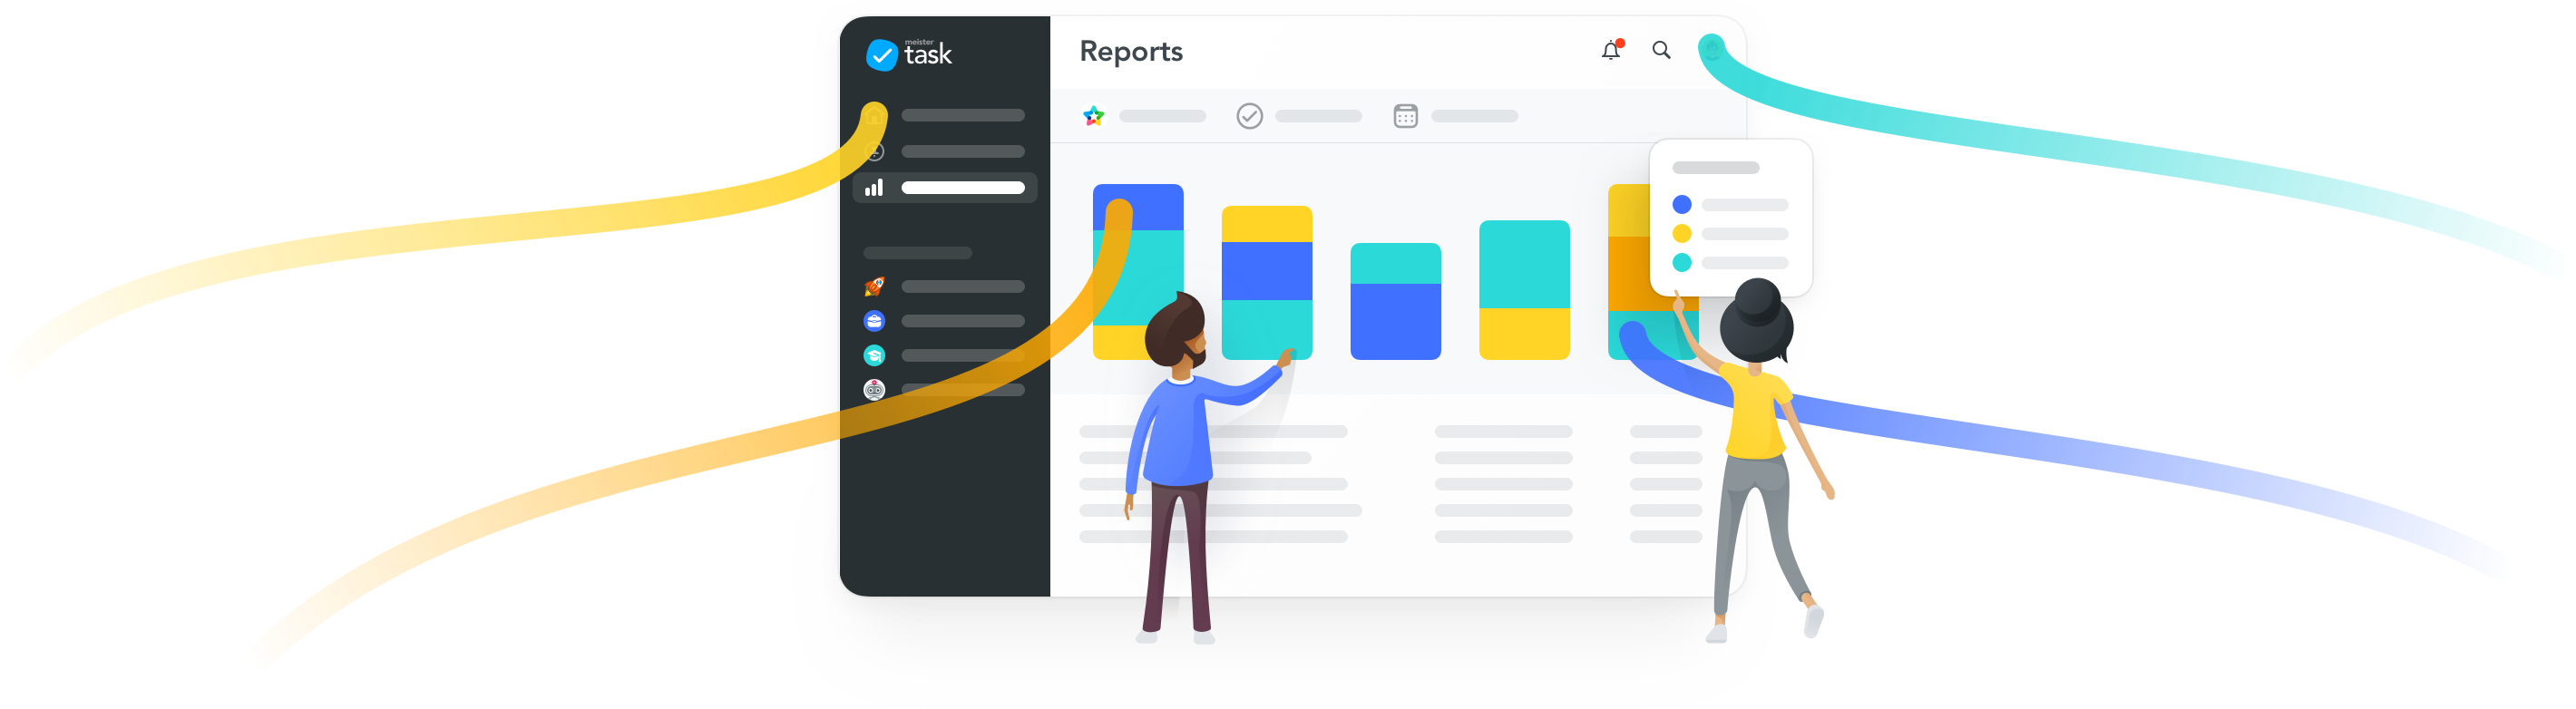 reports, meistertask reports, project report, kanban project report